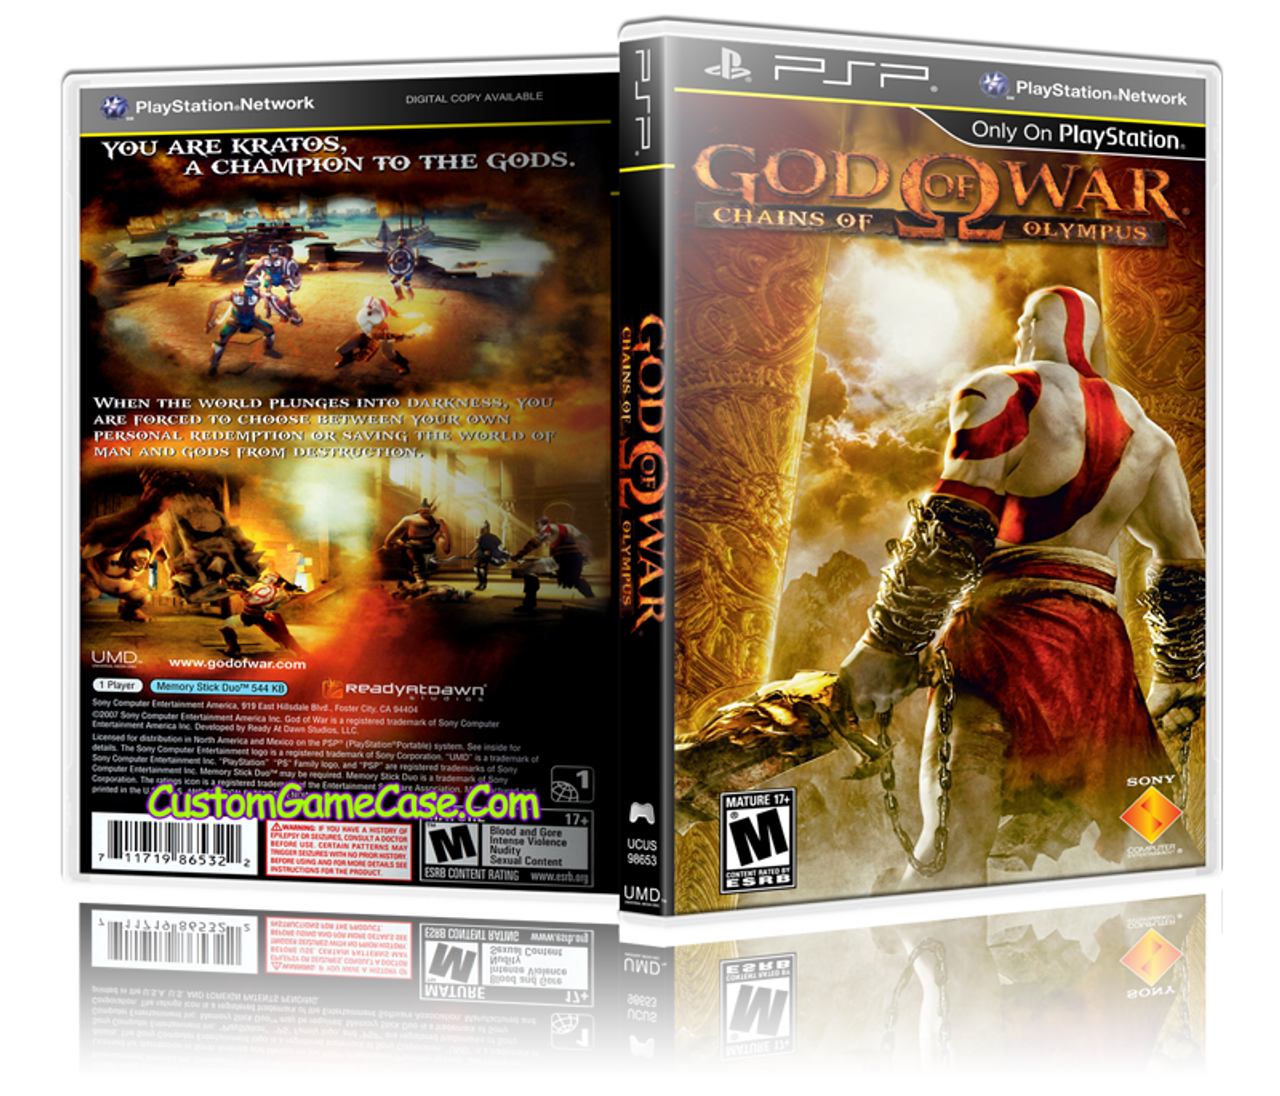 God of War Chains of the Olympus - Sony PlayStation Portable PSP